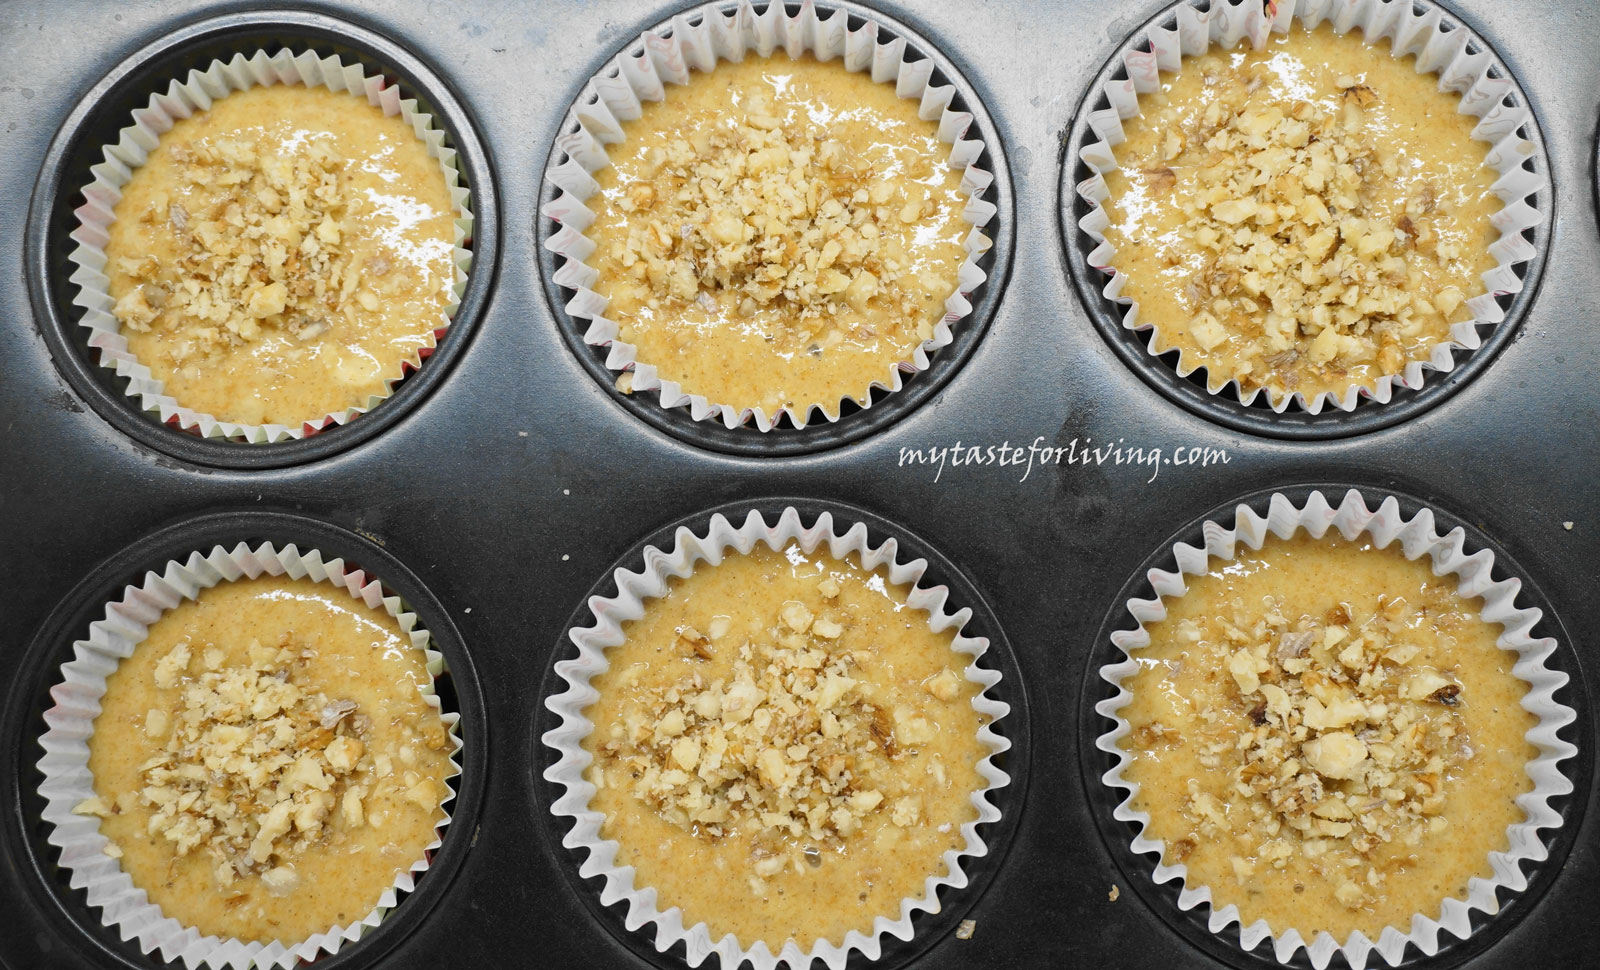 Delicious and quick muffins with bananas, walnuts and einkorn flour.